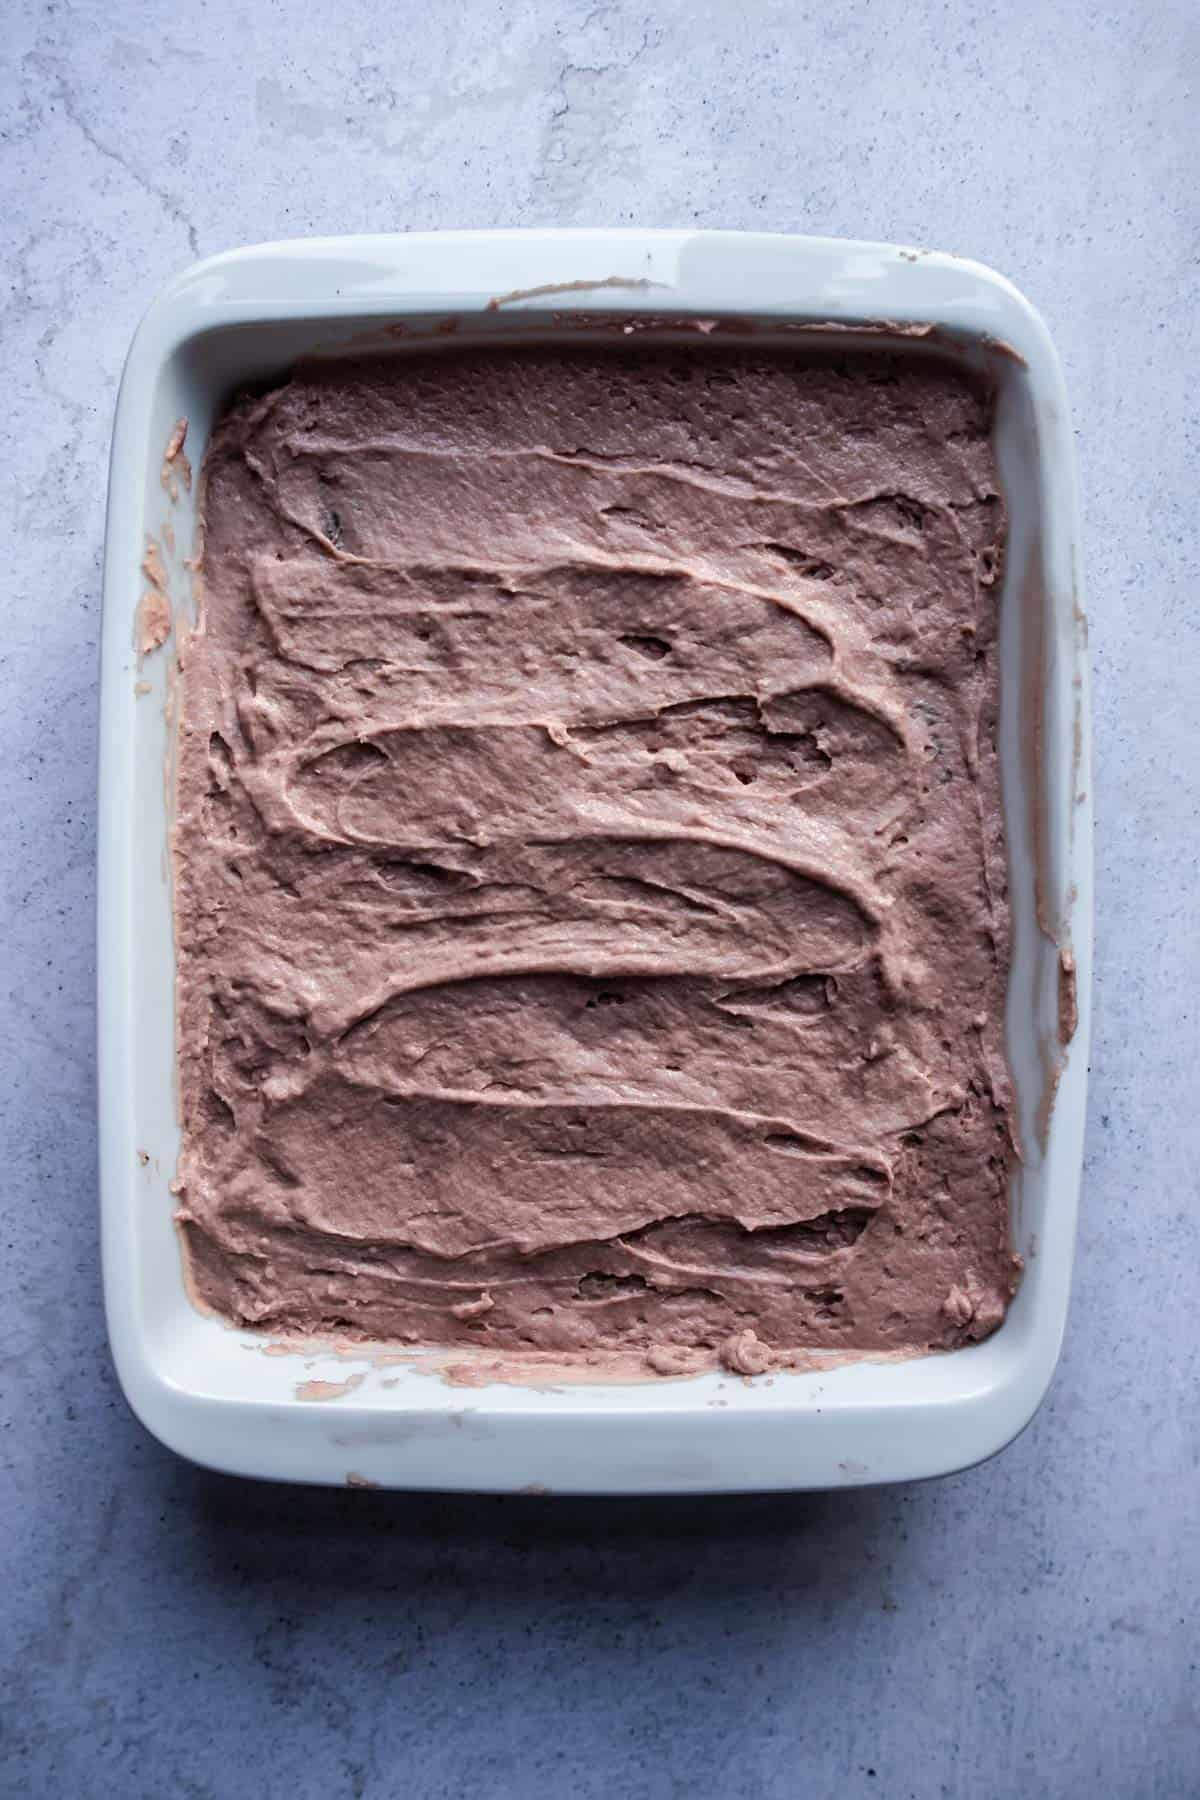 a mocha chocolate whipped cream layer in a baking dish for an icebox cake